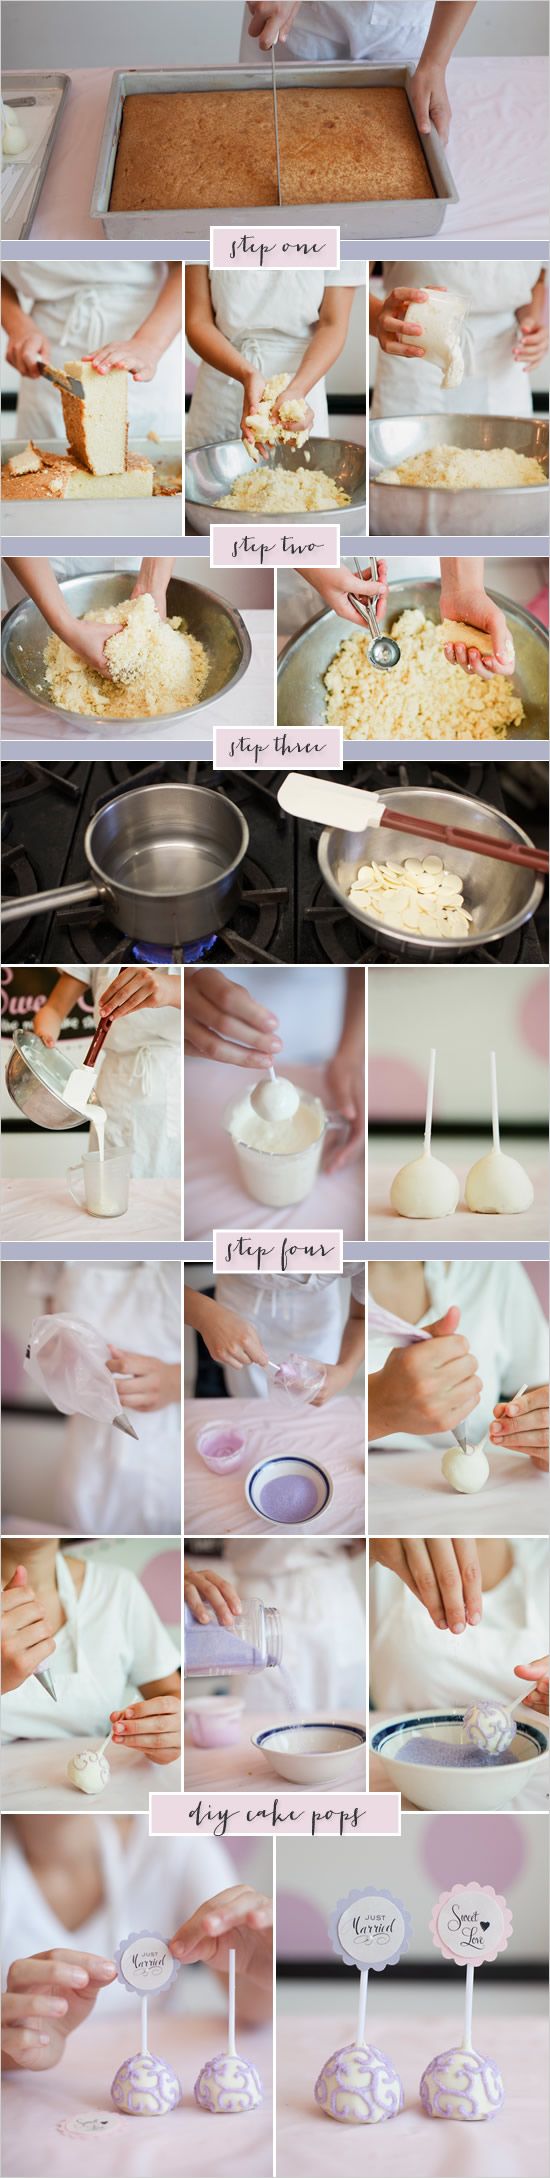 Step by step – How to make cake pops.